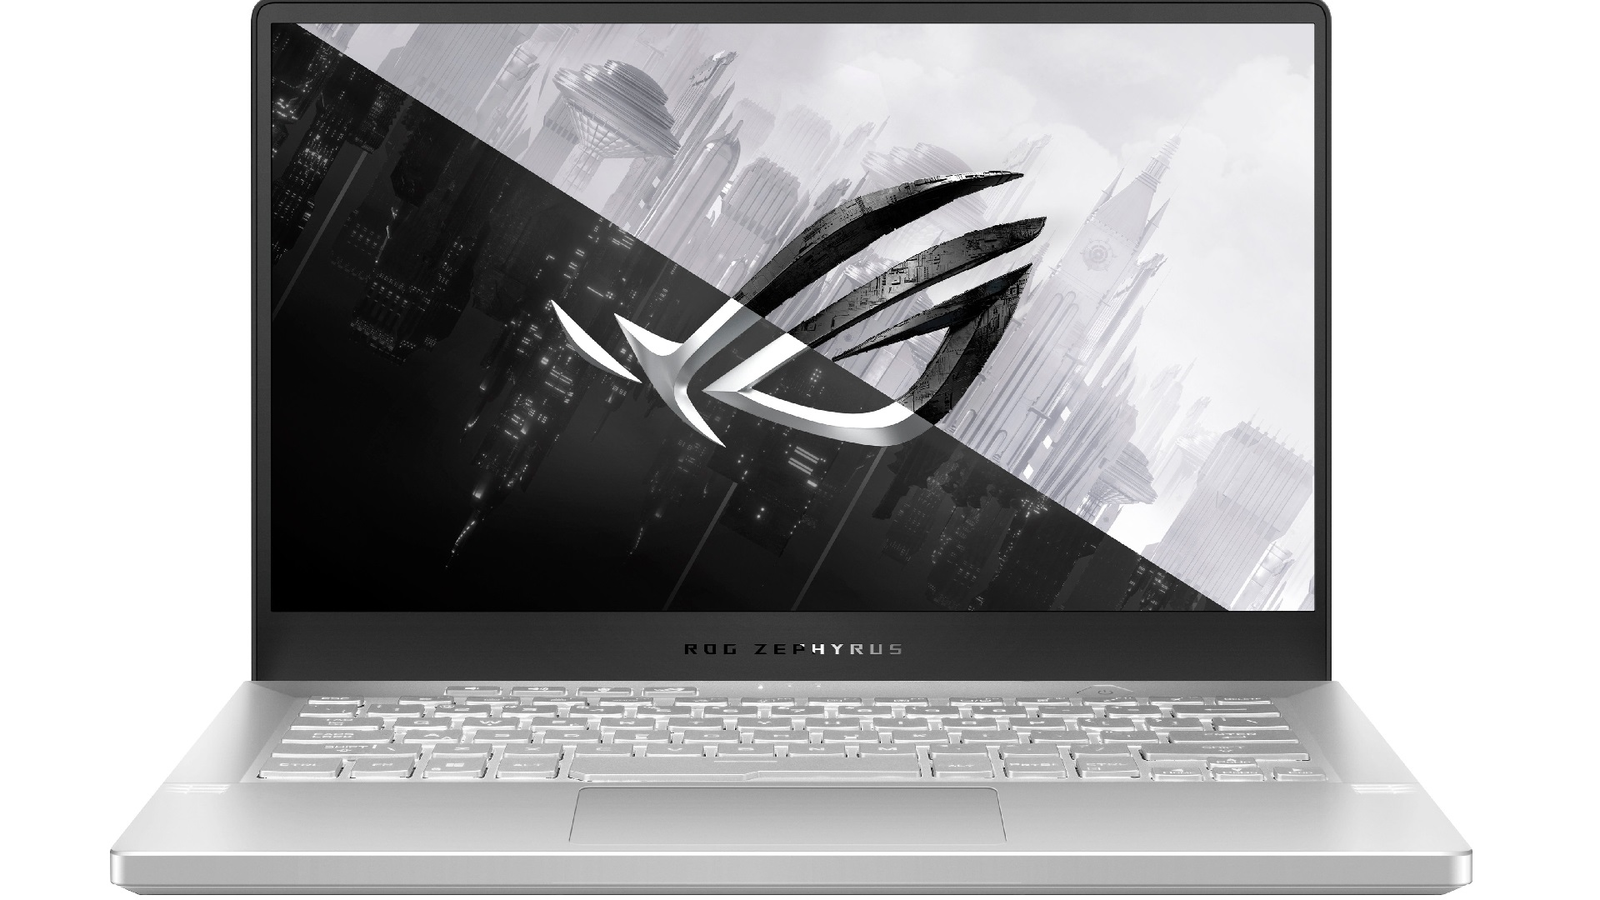 ASUS Republic of Gamers - A ninja is only as powerful as the